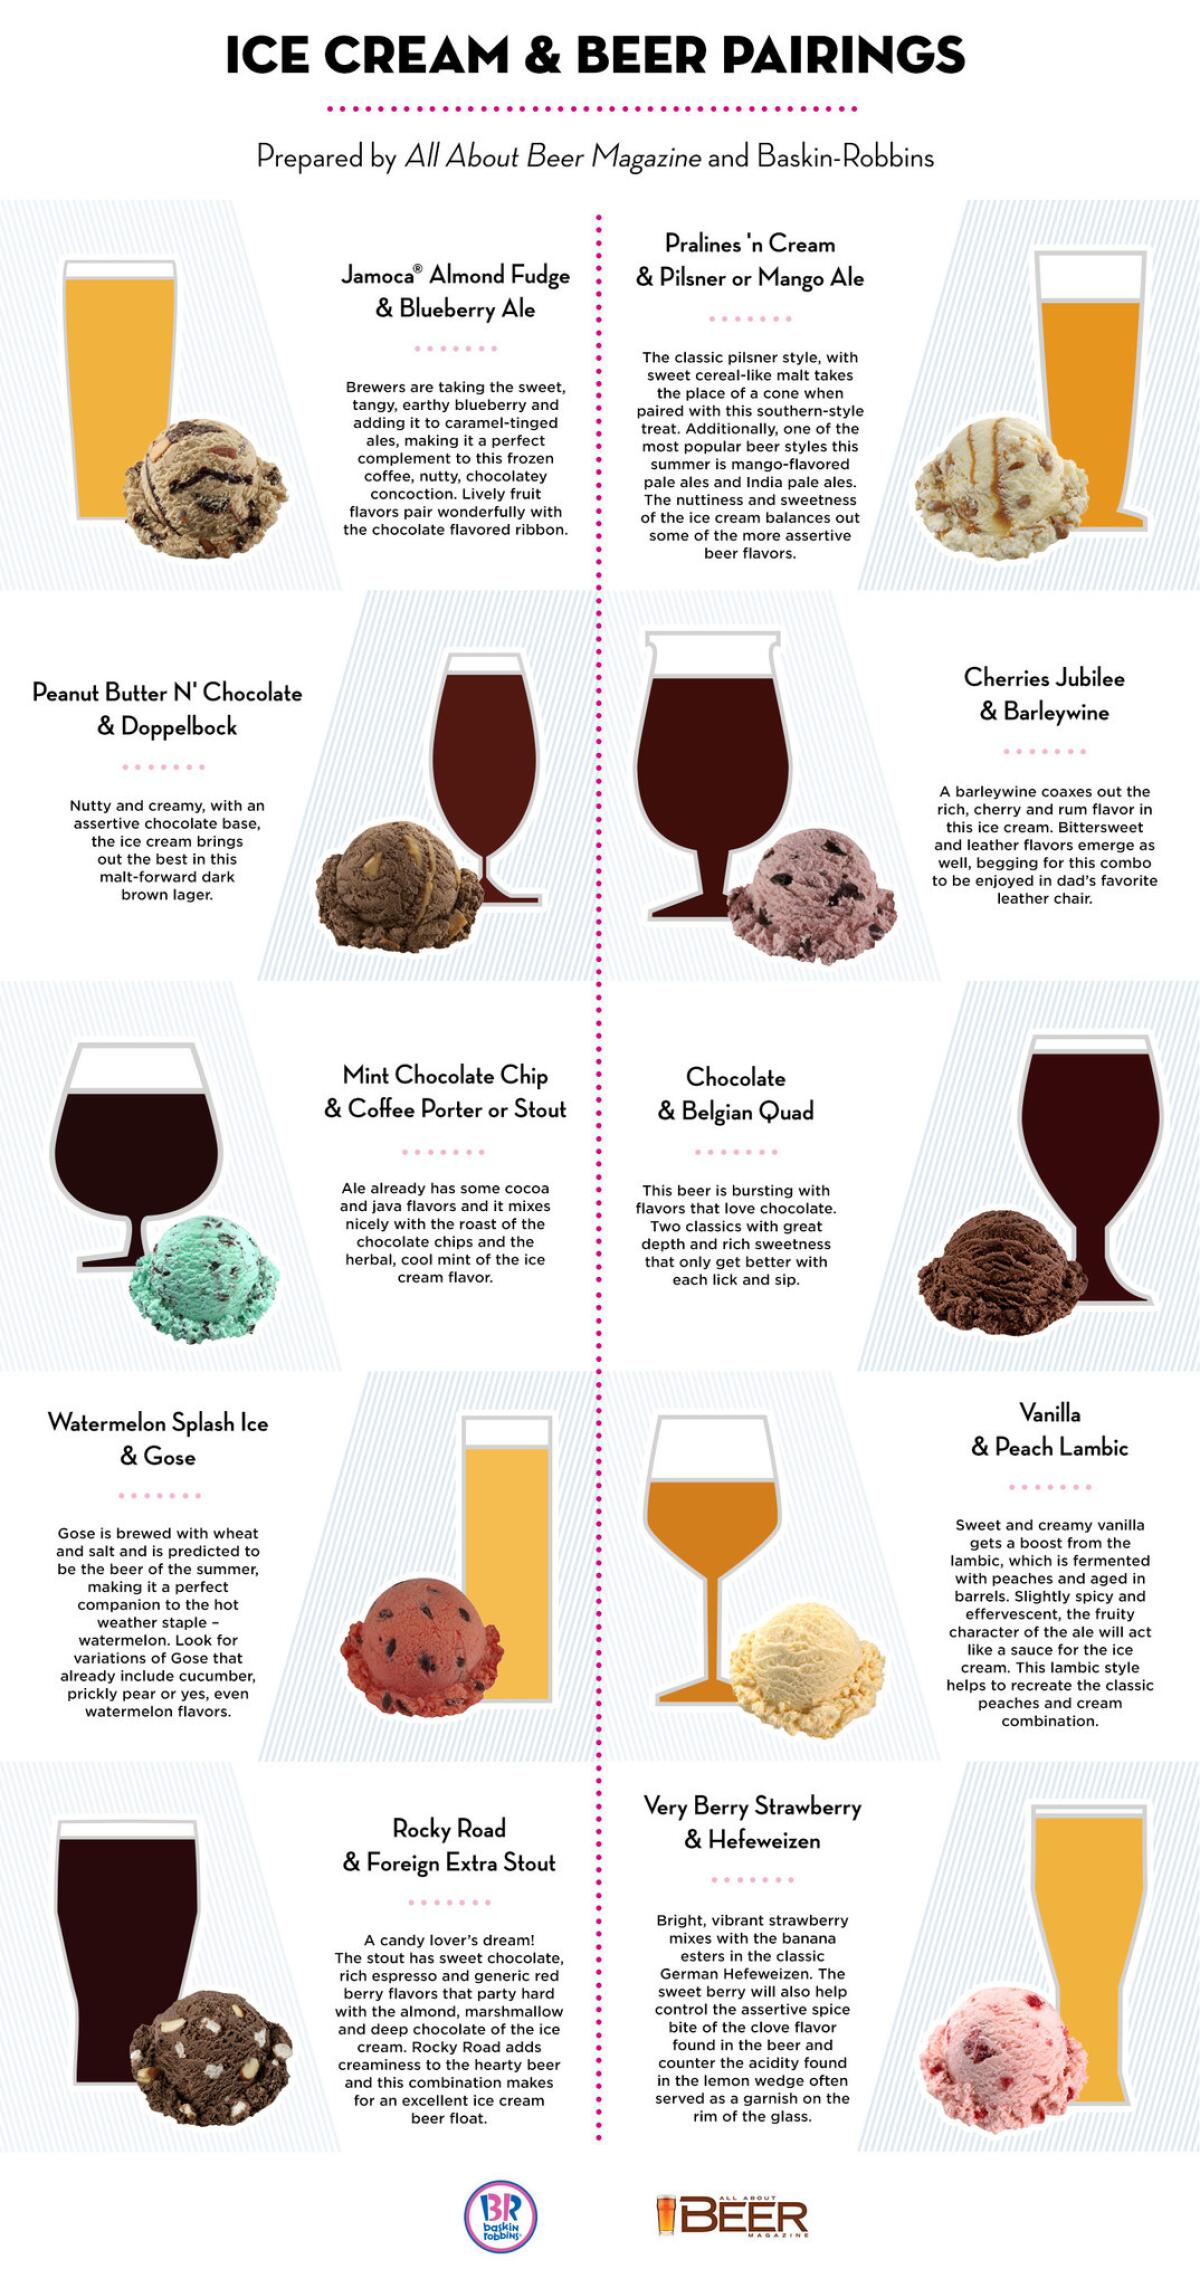 A beer and ice cream pairings infographic by Baskin-Robbins and "All About Beer" magazine (Baskin Robbins and "All About Beer")